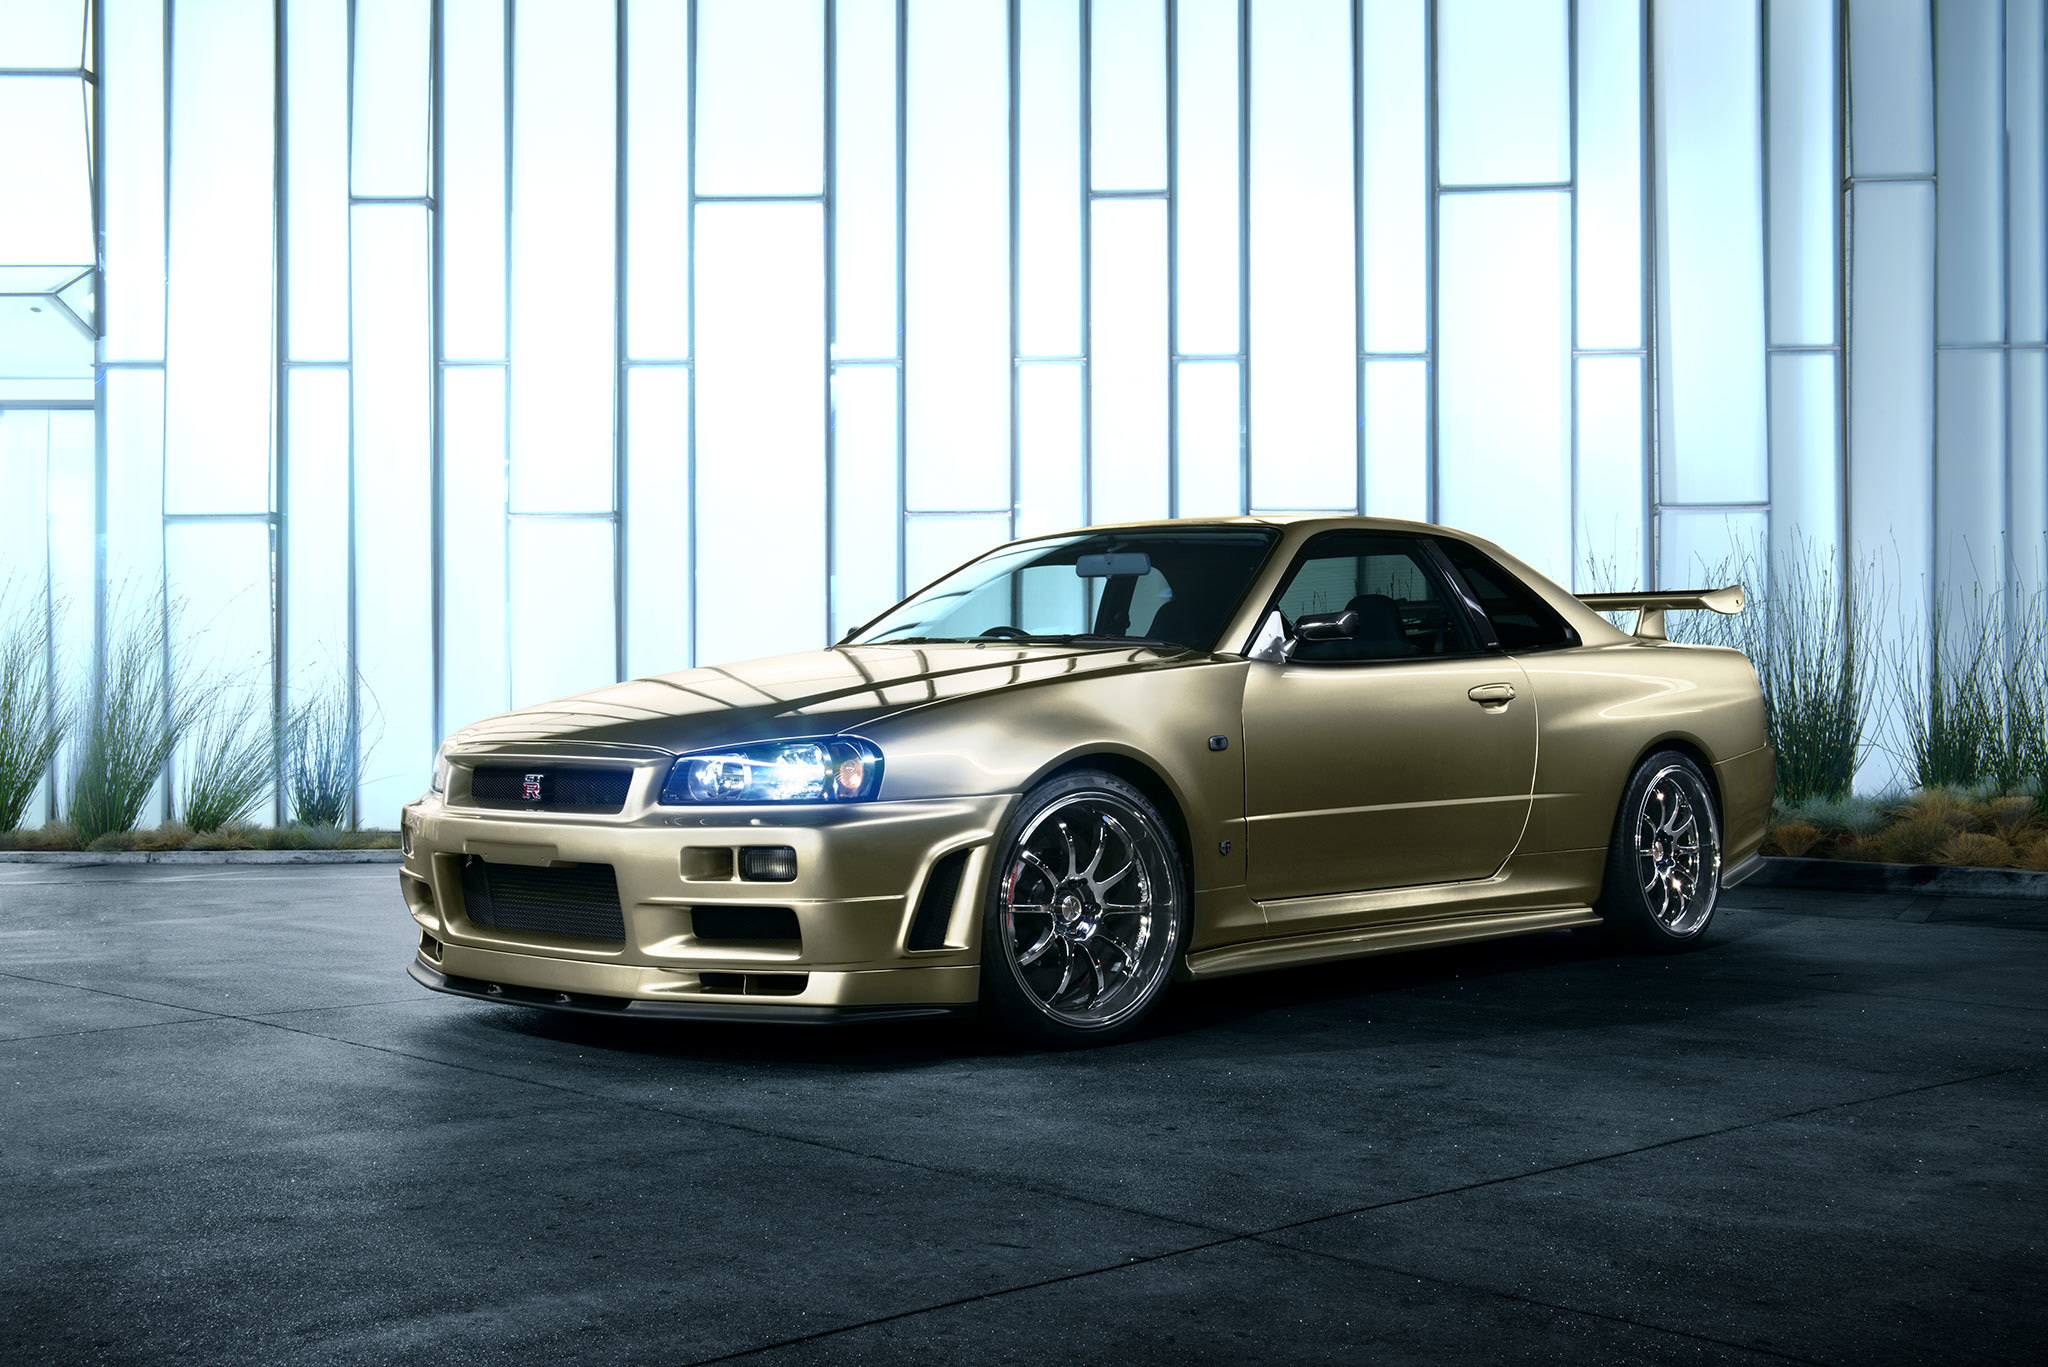 Free Images r34, nissan skyline, side view, cars Golden